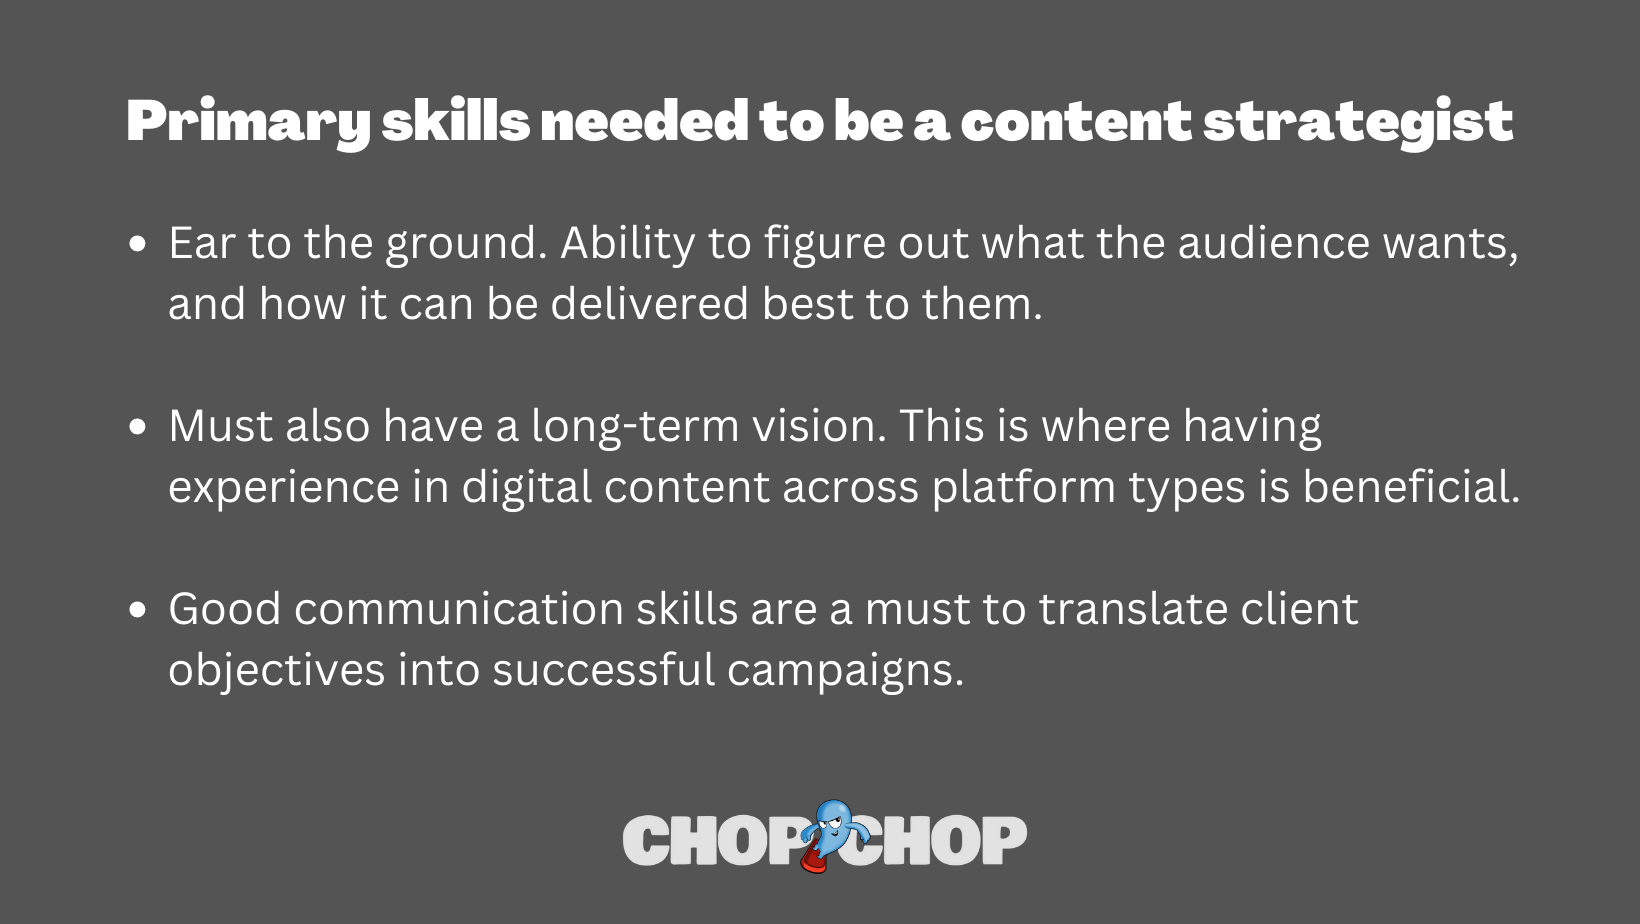 Primary skills needed to be a content strategy, including figuring out what the audience wants to a long-term vision and strong communication skills.